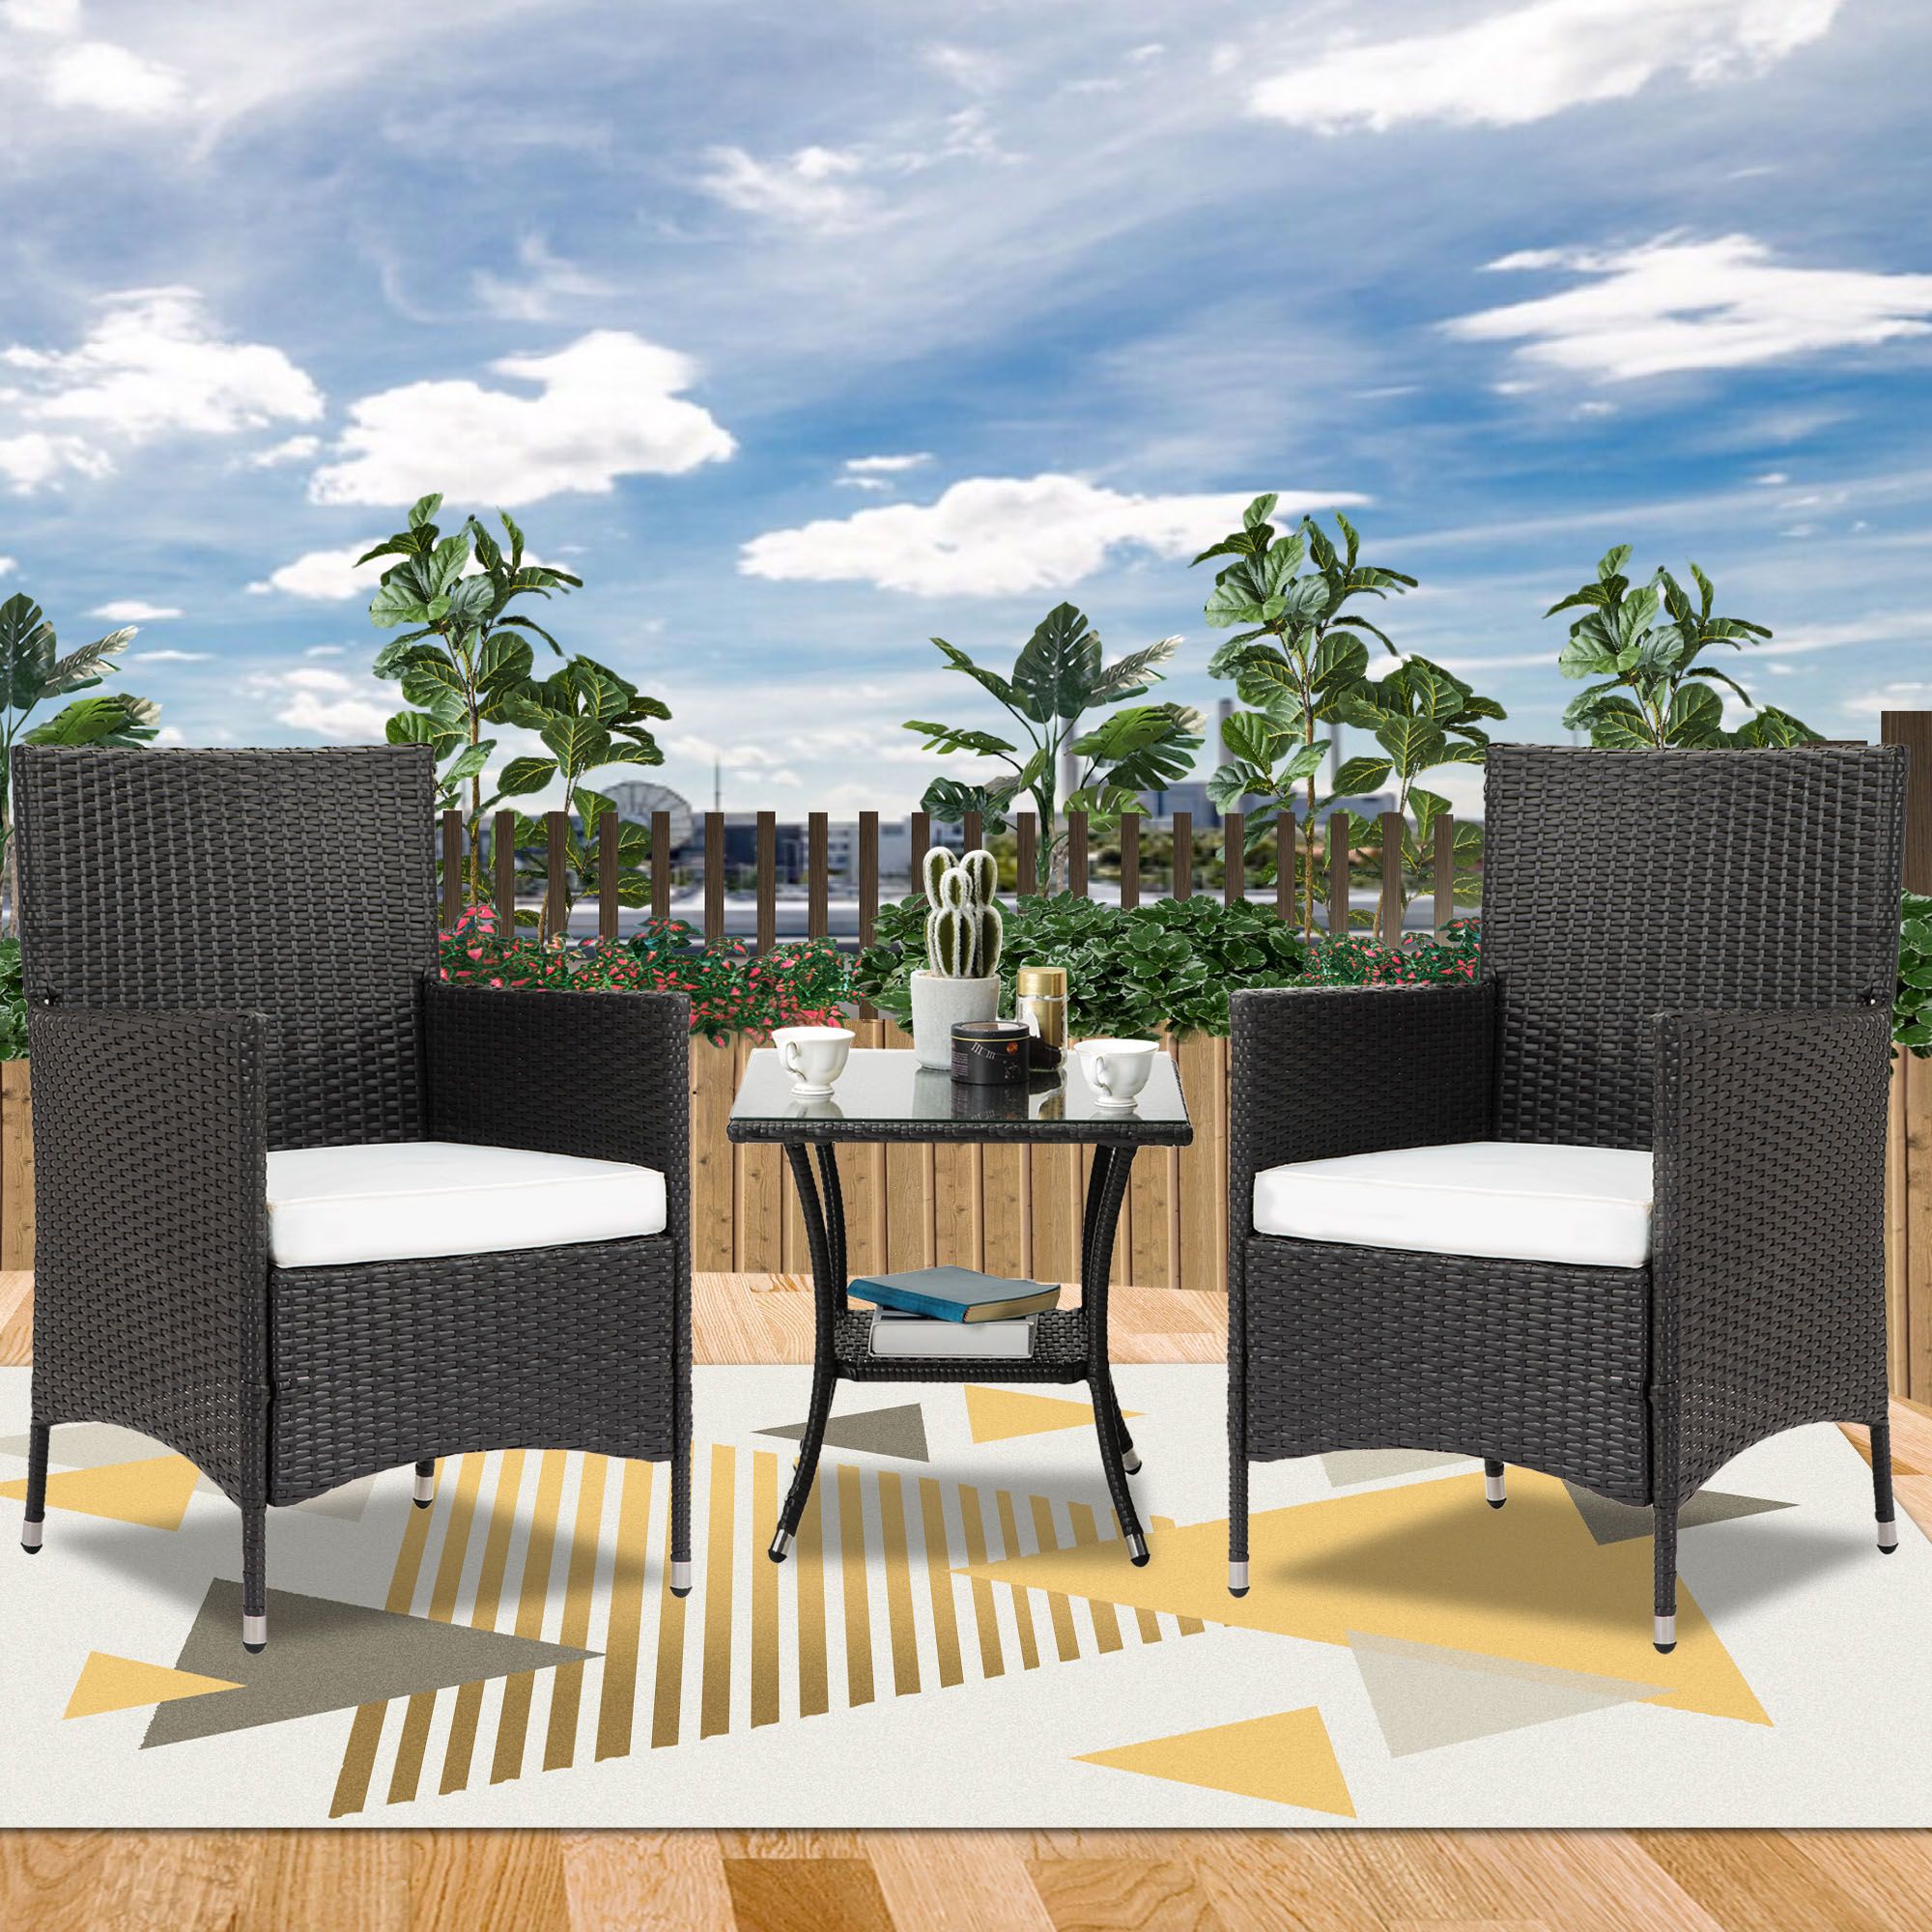 Outdoor Furniture Sets Clearance, 3 Piece Patio Table And Chairs Set With Regard To 3 Piece Outdoor Table And Loveseat Sets (View 11 of 15)